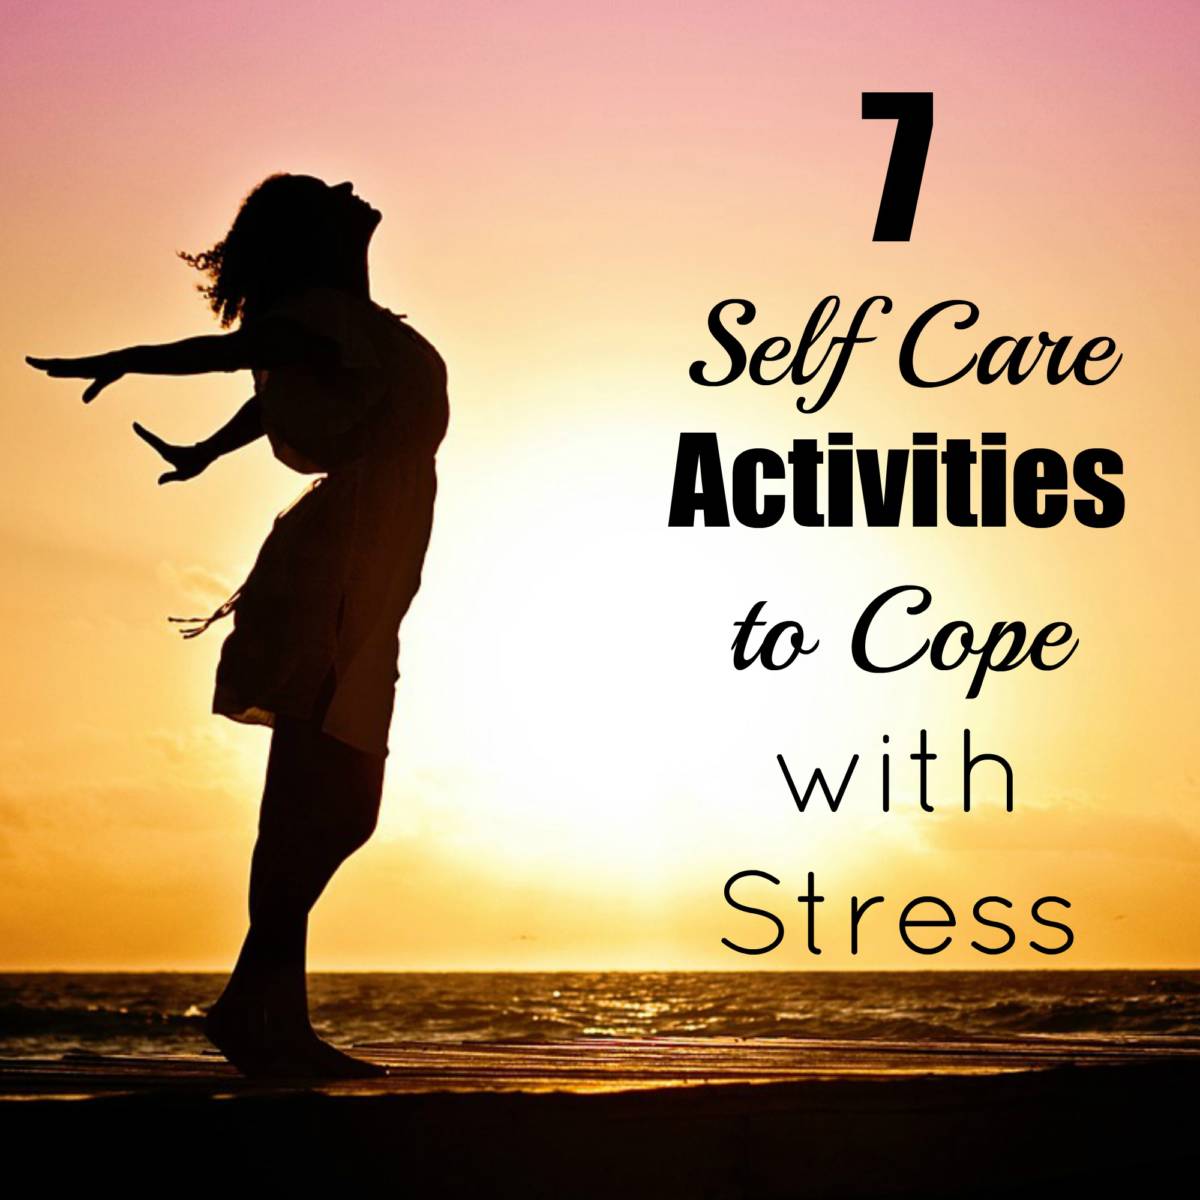 7 Self Care activities to cope with stress